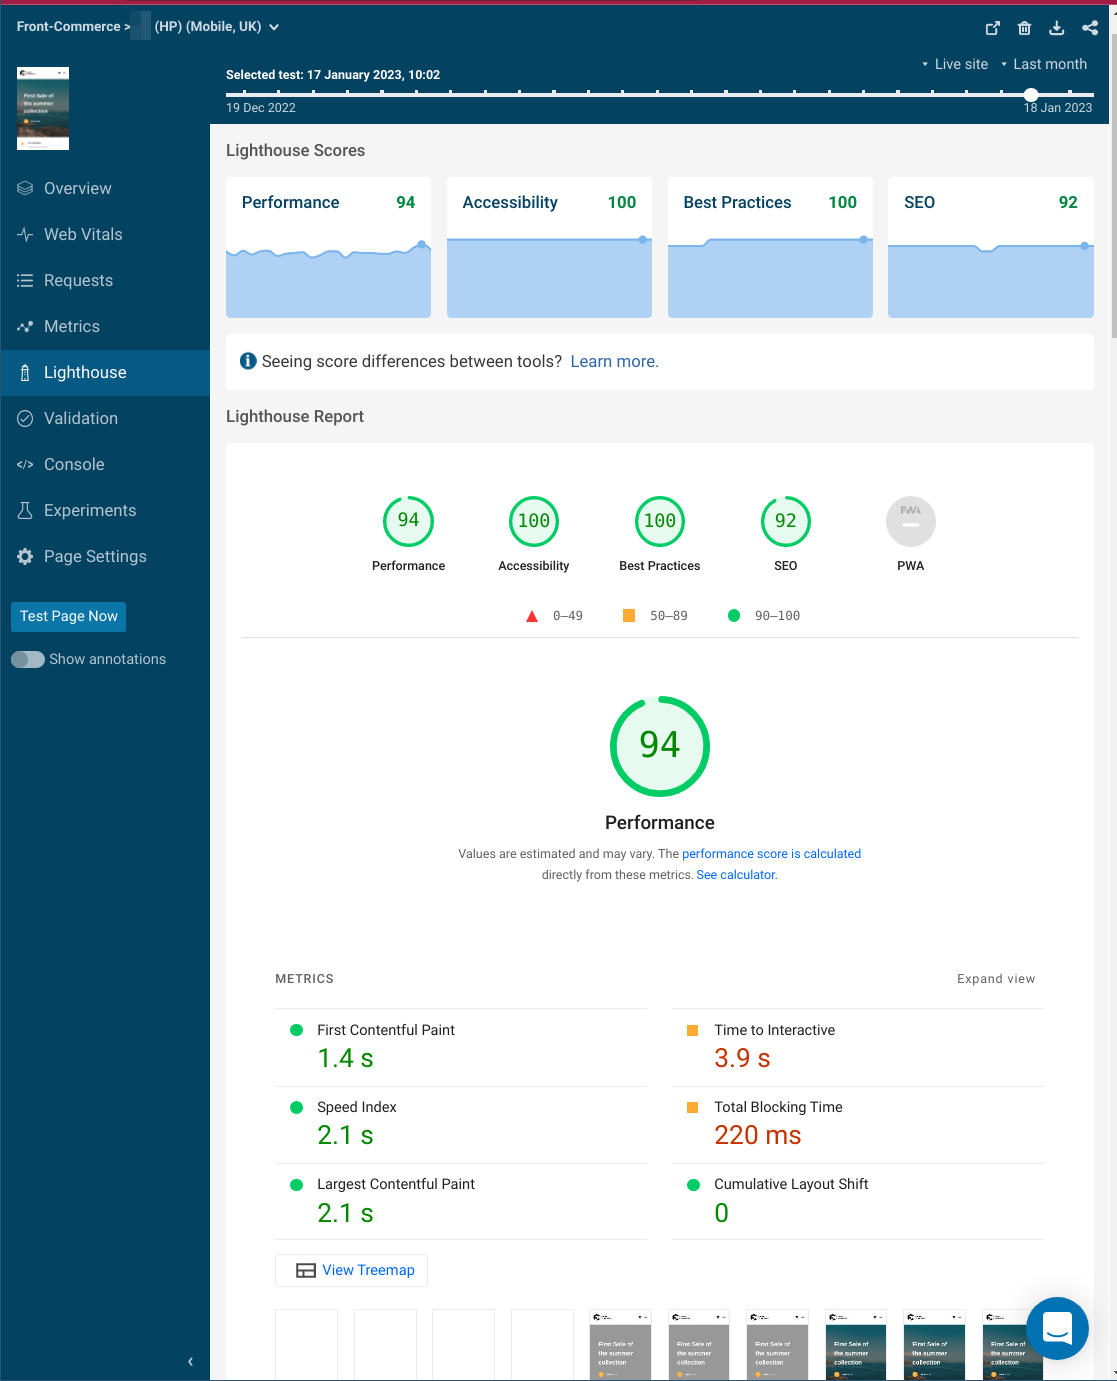 Screenshot of a DebugBear Lighthouse panel with performance score of 94 for a mobile run of a test on Front-Commerce demo homepage